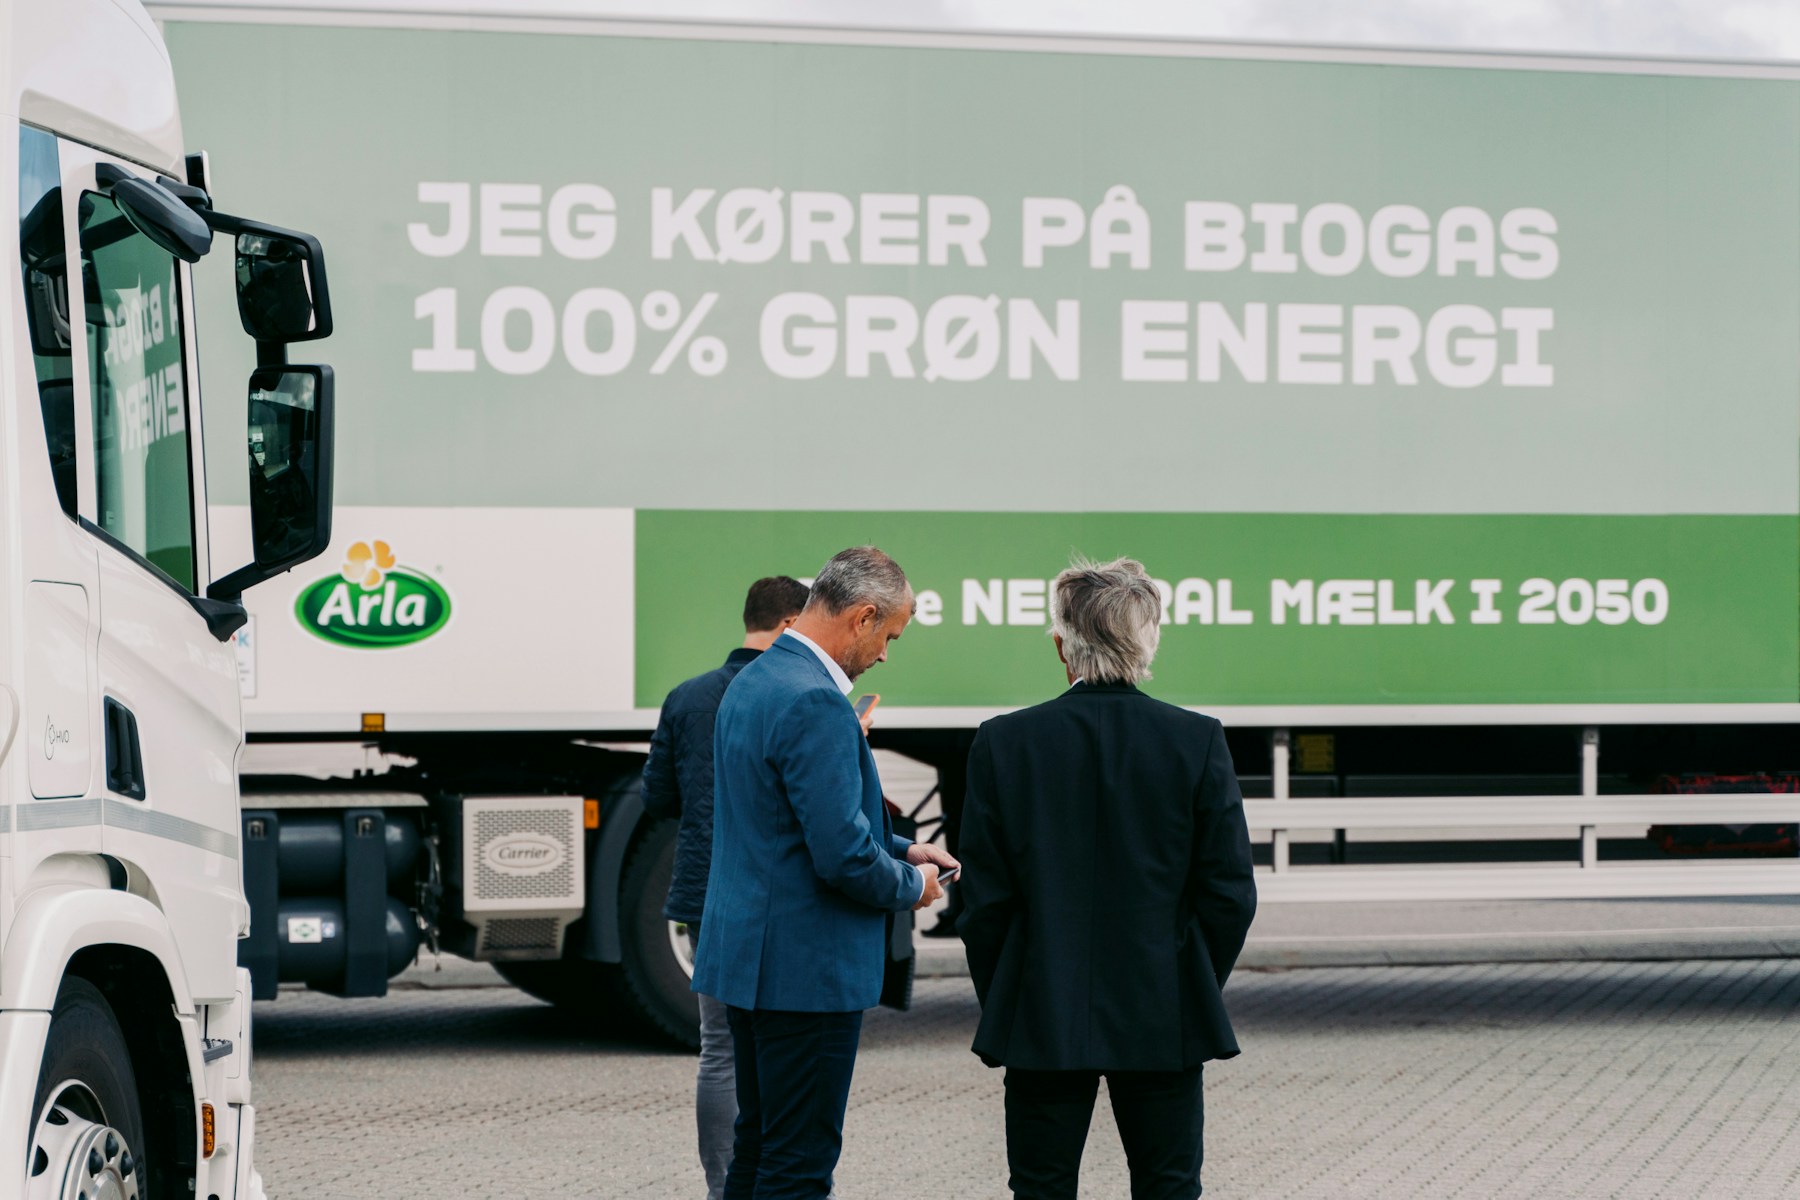 truck driving on biogas